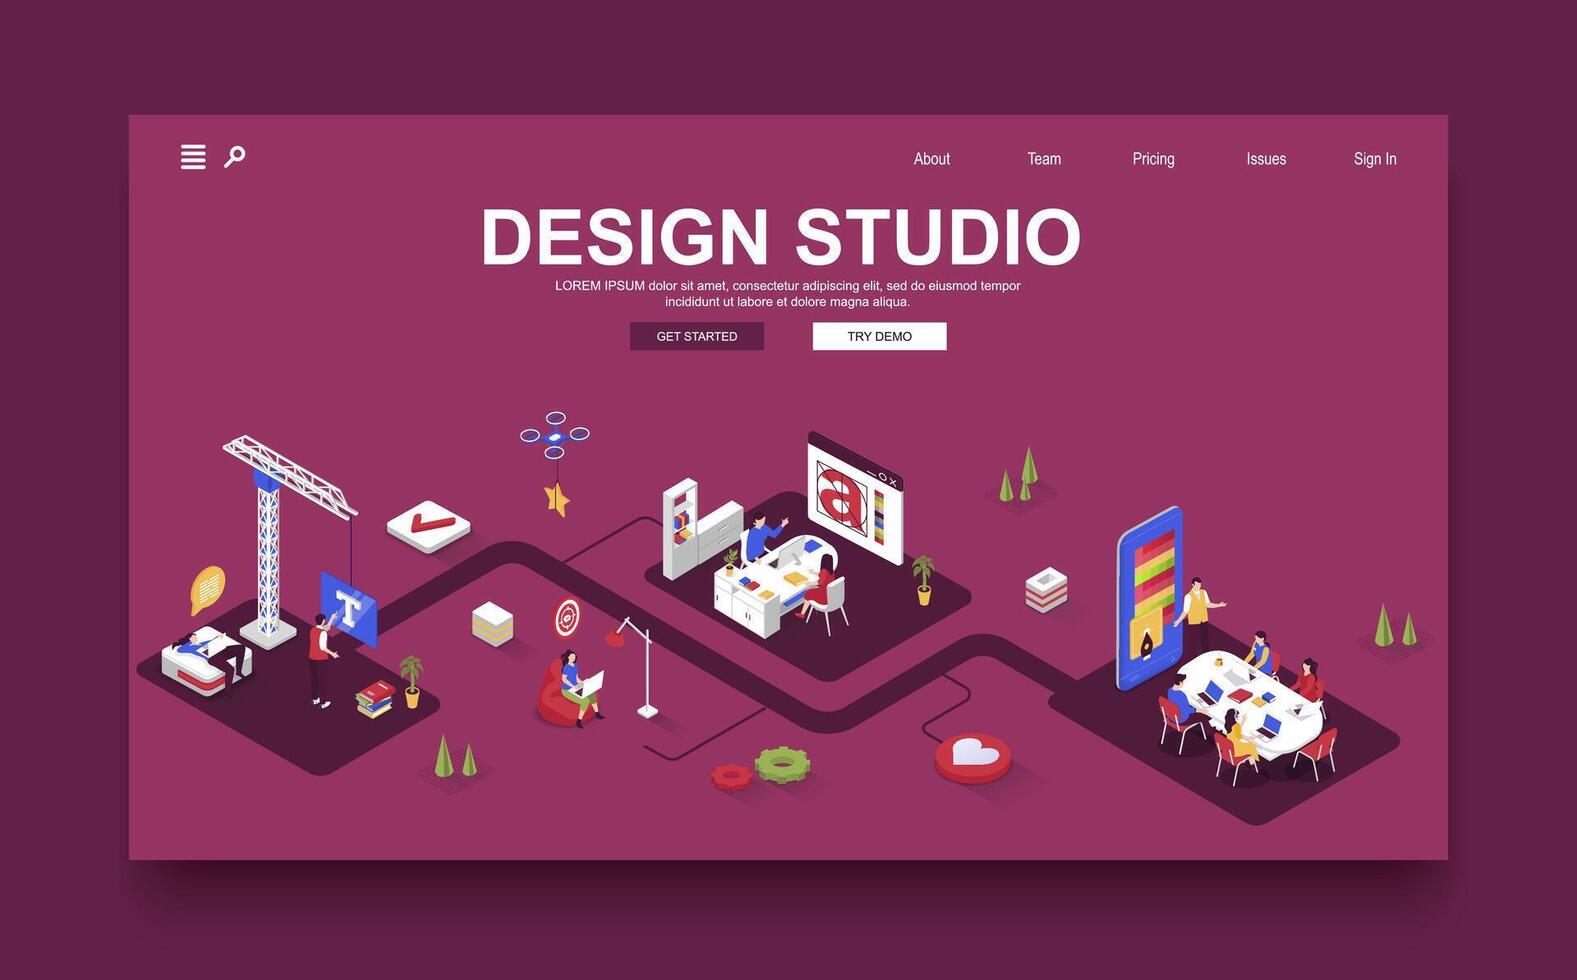 Design studio concept 3d isometric landing page template. People work in creative agency, create graphic content, develop logos and branding. Vector illustration in isometry graphic design.